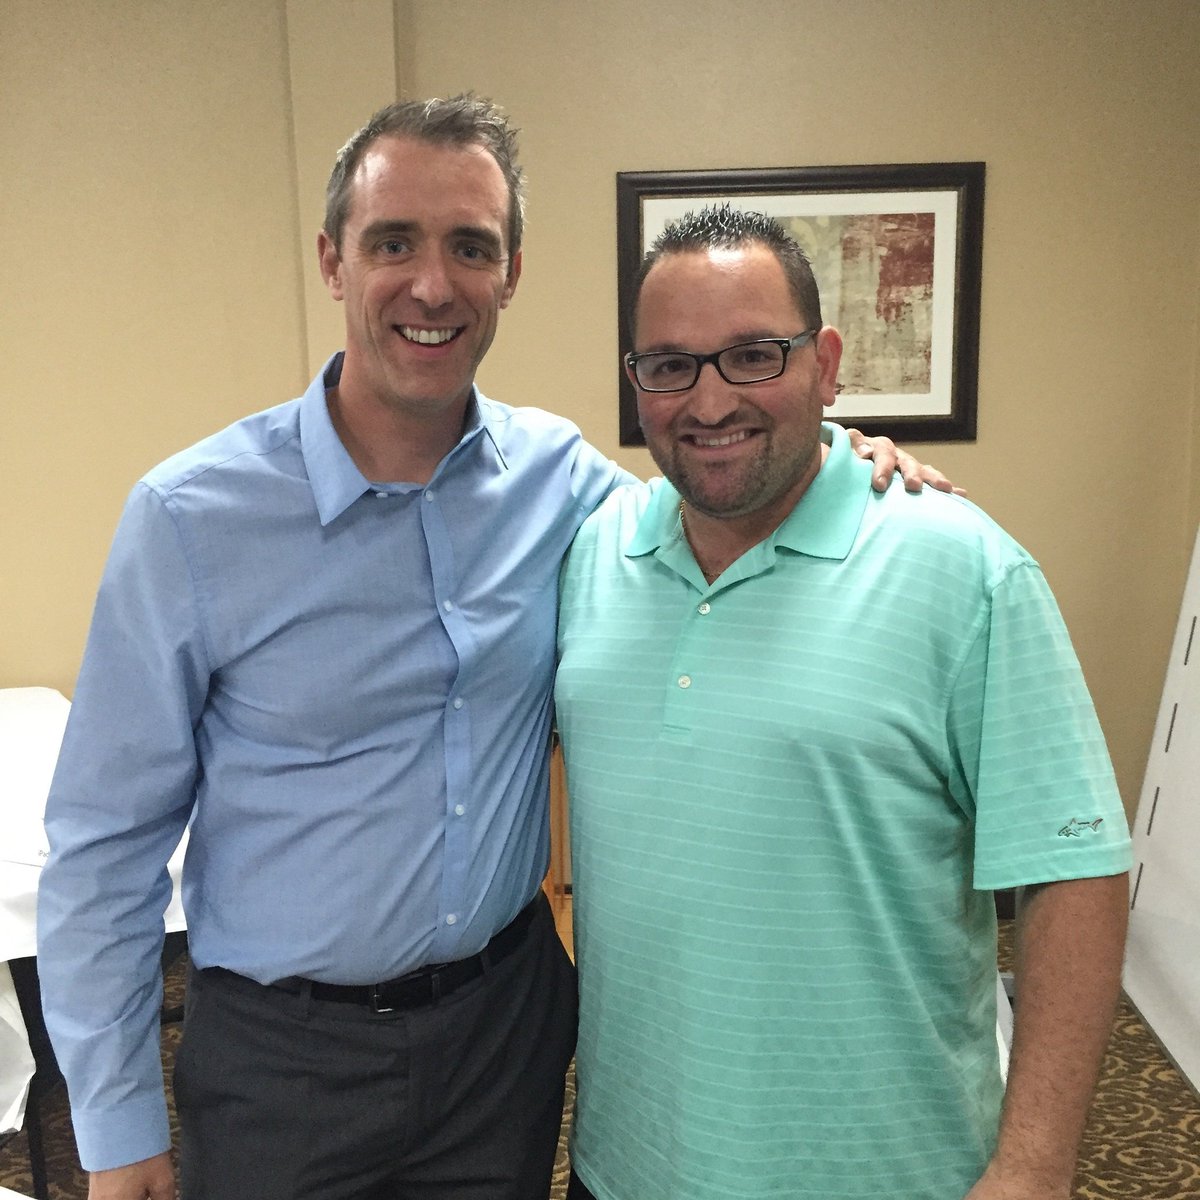 Great to see a long-time friend from my #hometown of #linwoodnj at my #investing class in #longbeach.  #eastcoasttowestcoast